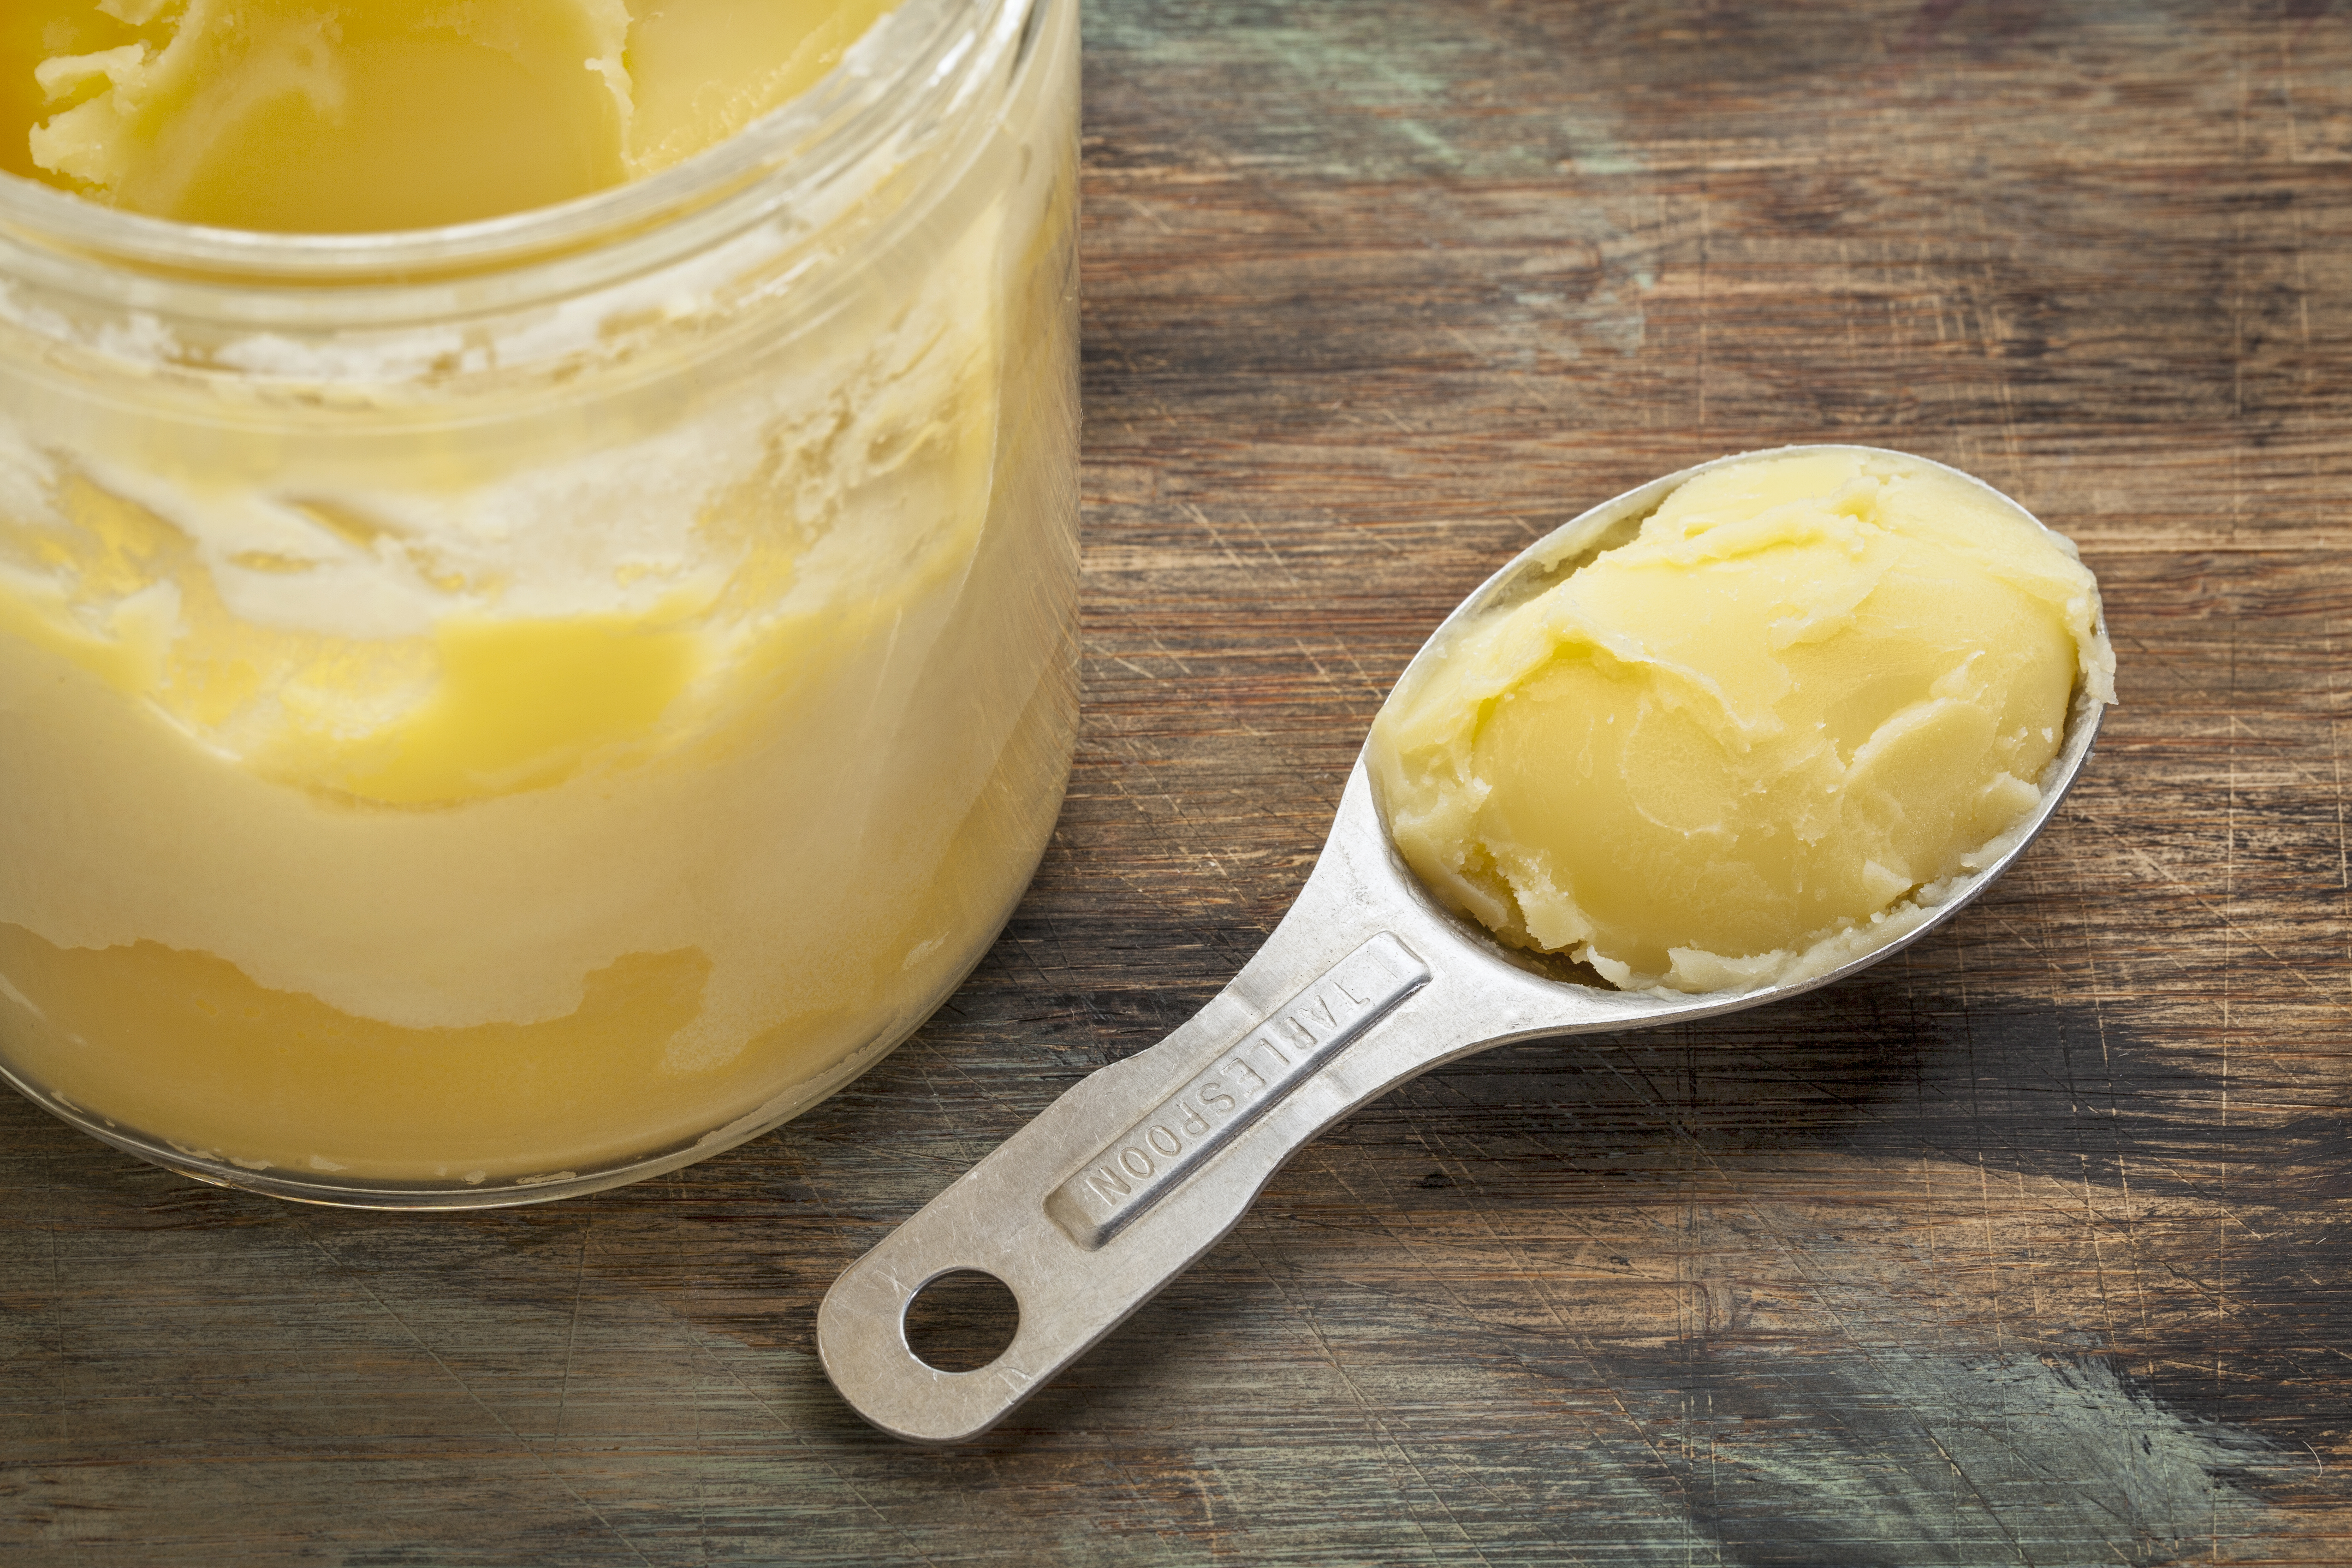 jar and measuring tablespoon of ghee - clarified butter on grunge wood